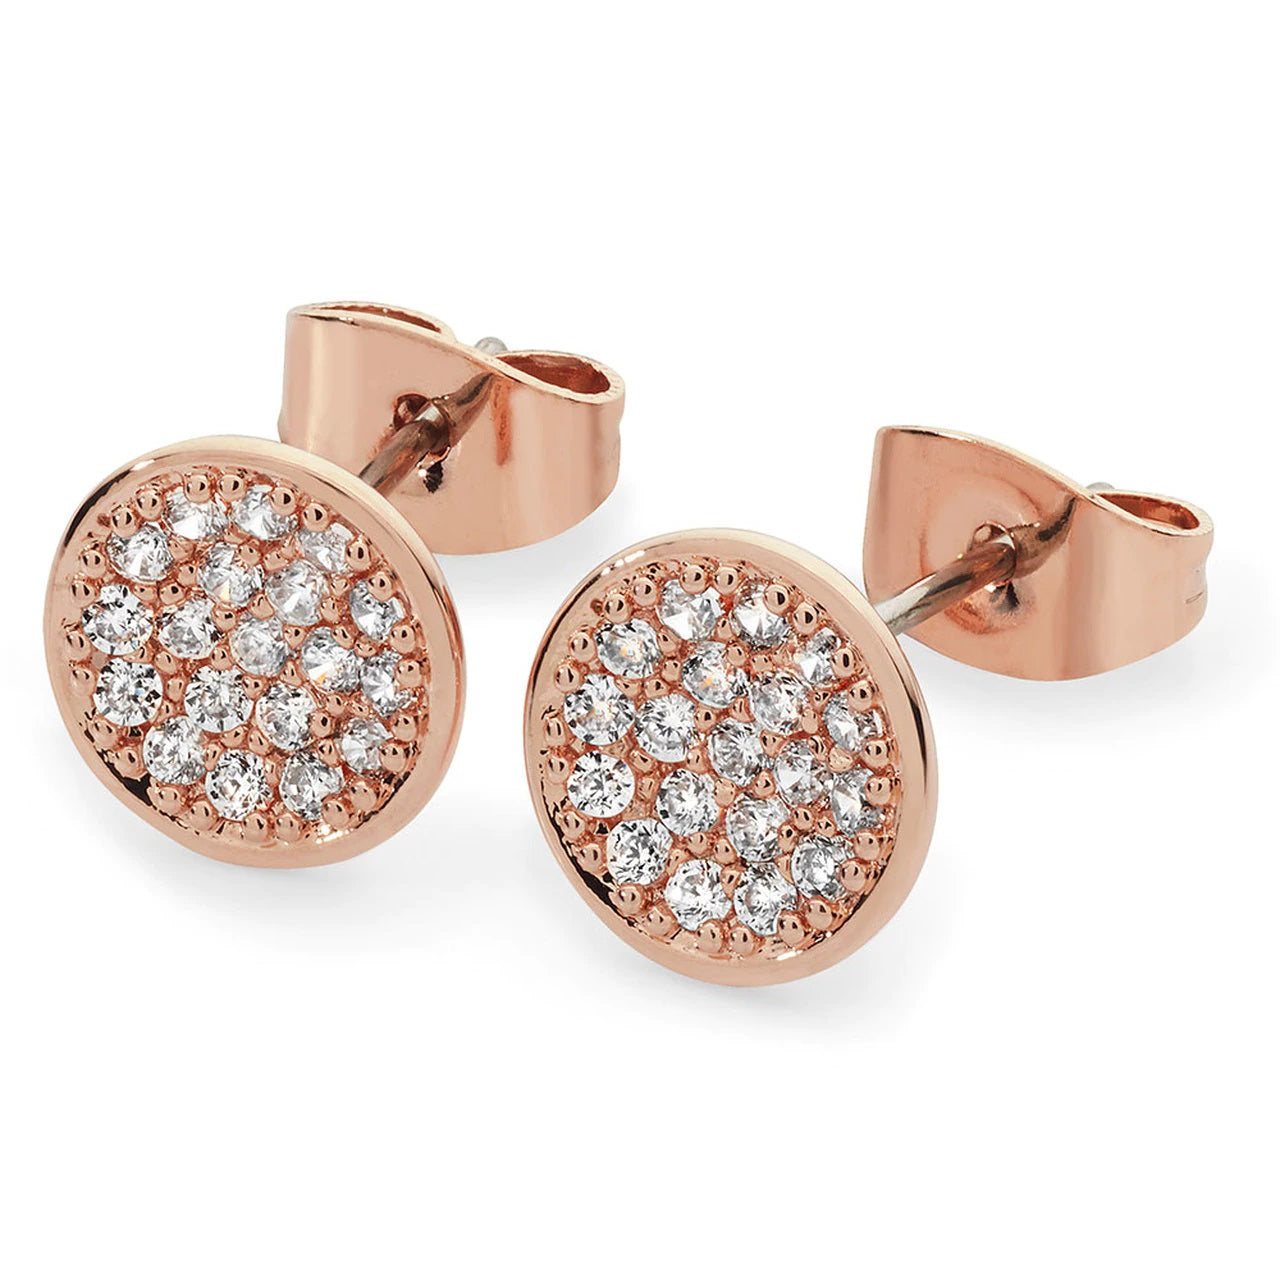 Tipperary Crystal Pave Full Moon Earrings Rose Gold  Dainty and dazzling, these earrings are a mini version of our pavé moon pendant. Full of sparkle, these adorable rose gold earrings are covered in round micro-set clear crystals. They secure comfortably with push back closures.